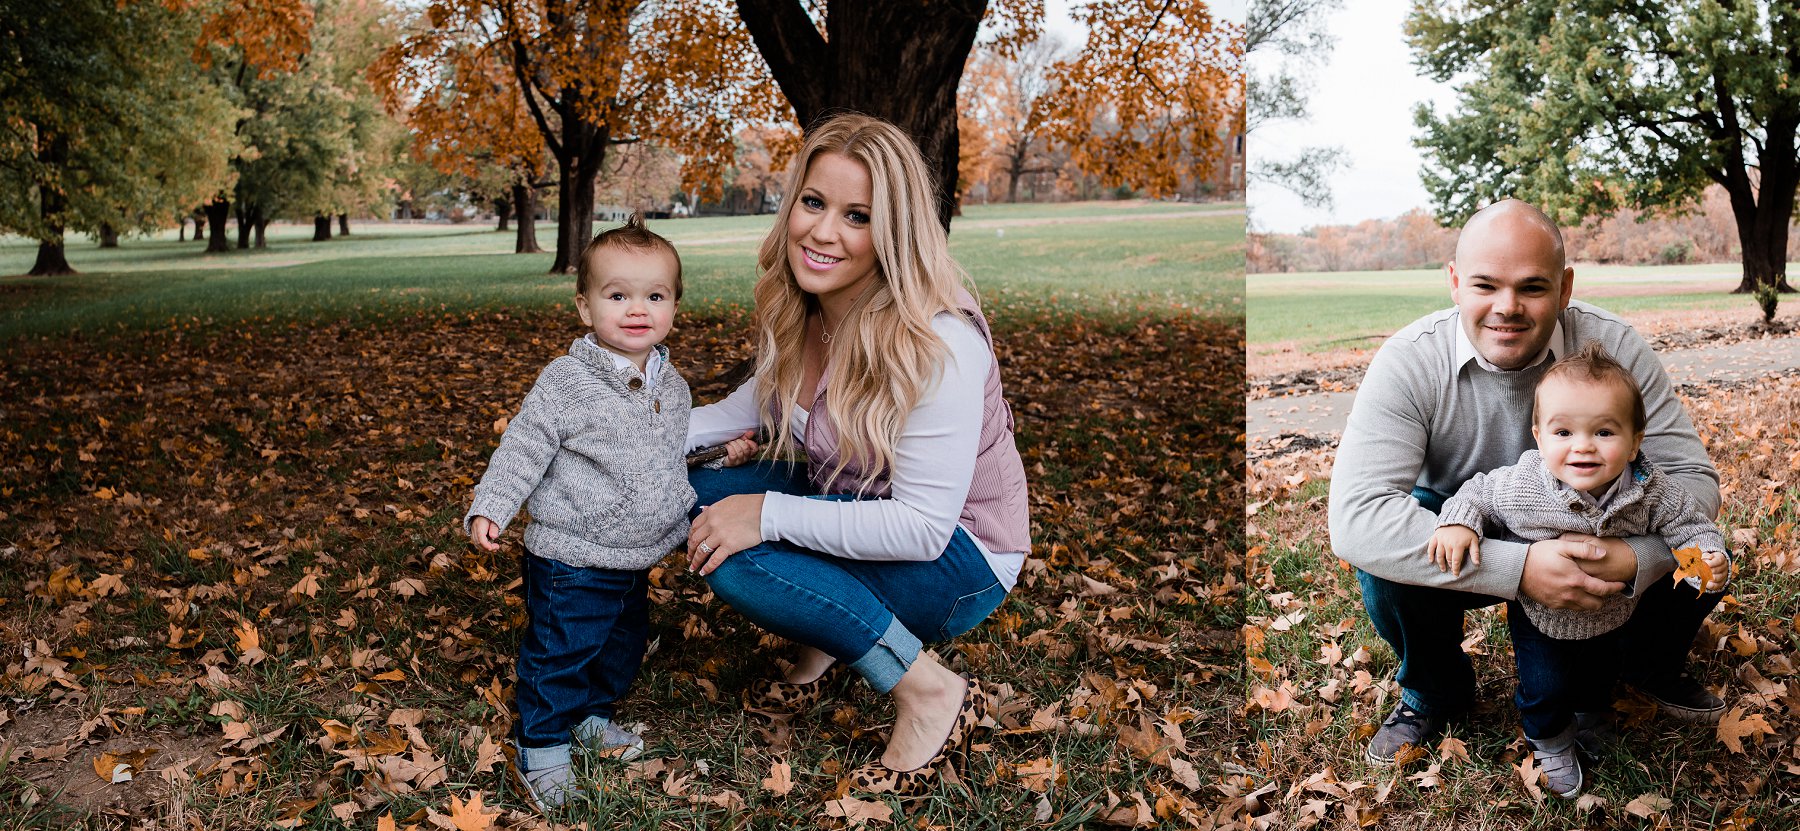 Fall Family Photography at Belvoir WInery by Family Photographer in Kansas City, Merry Ohler (3)